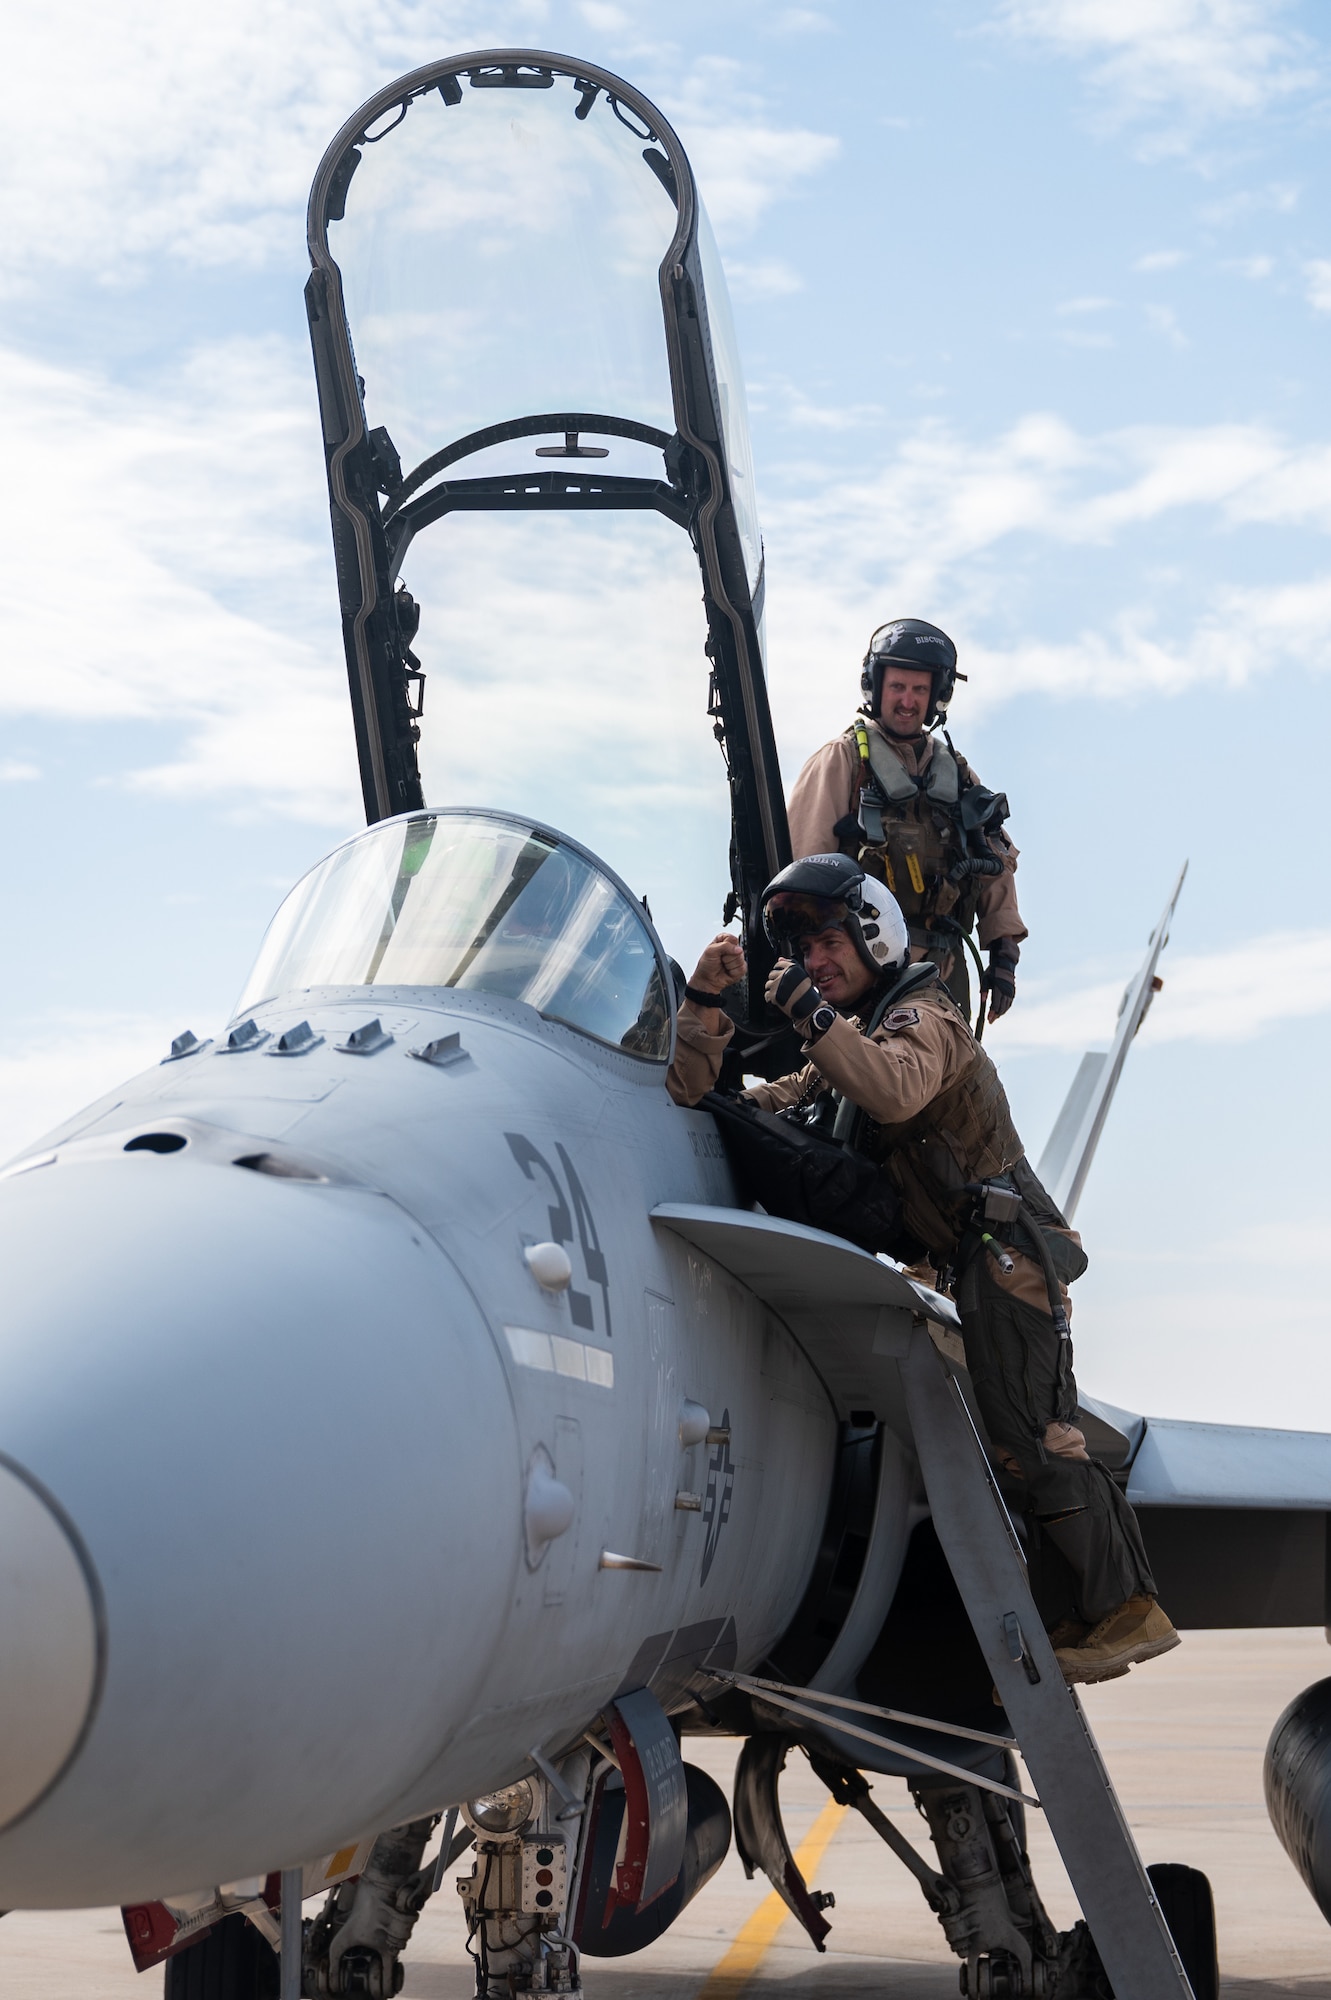 U.S. Air Force Brig. Gen. Robert Davis, 378th Air Expeditionary Wing commander, climbs into an F/A-18 Hornet at Prince Sultan Air Base, Kingdom of Saudi Arabia, Jan. 11, 2022. Davis flew with the Marine Fighter Attack Squadron 115 in order to better understand the role and capabilities of the VMFA-115 and the F/A-18. (U.S. Air Force photo by Senior Airman Jacob B. Wrightsman)